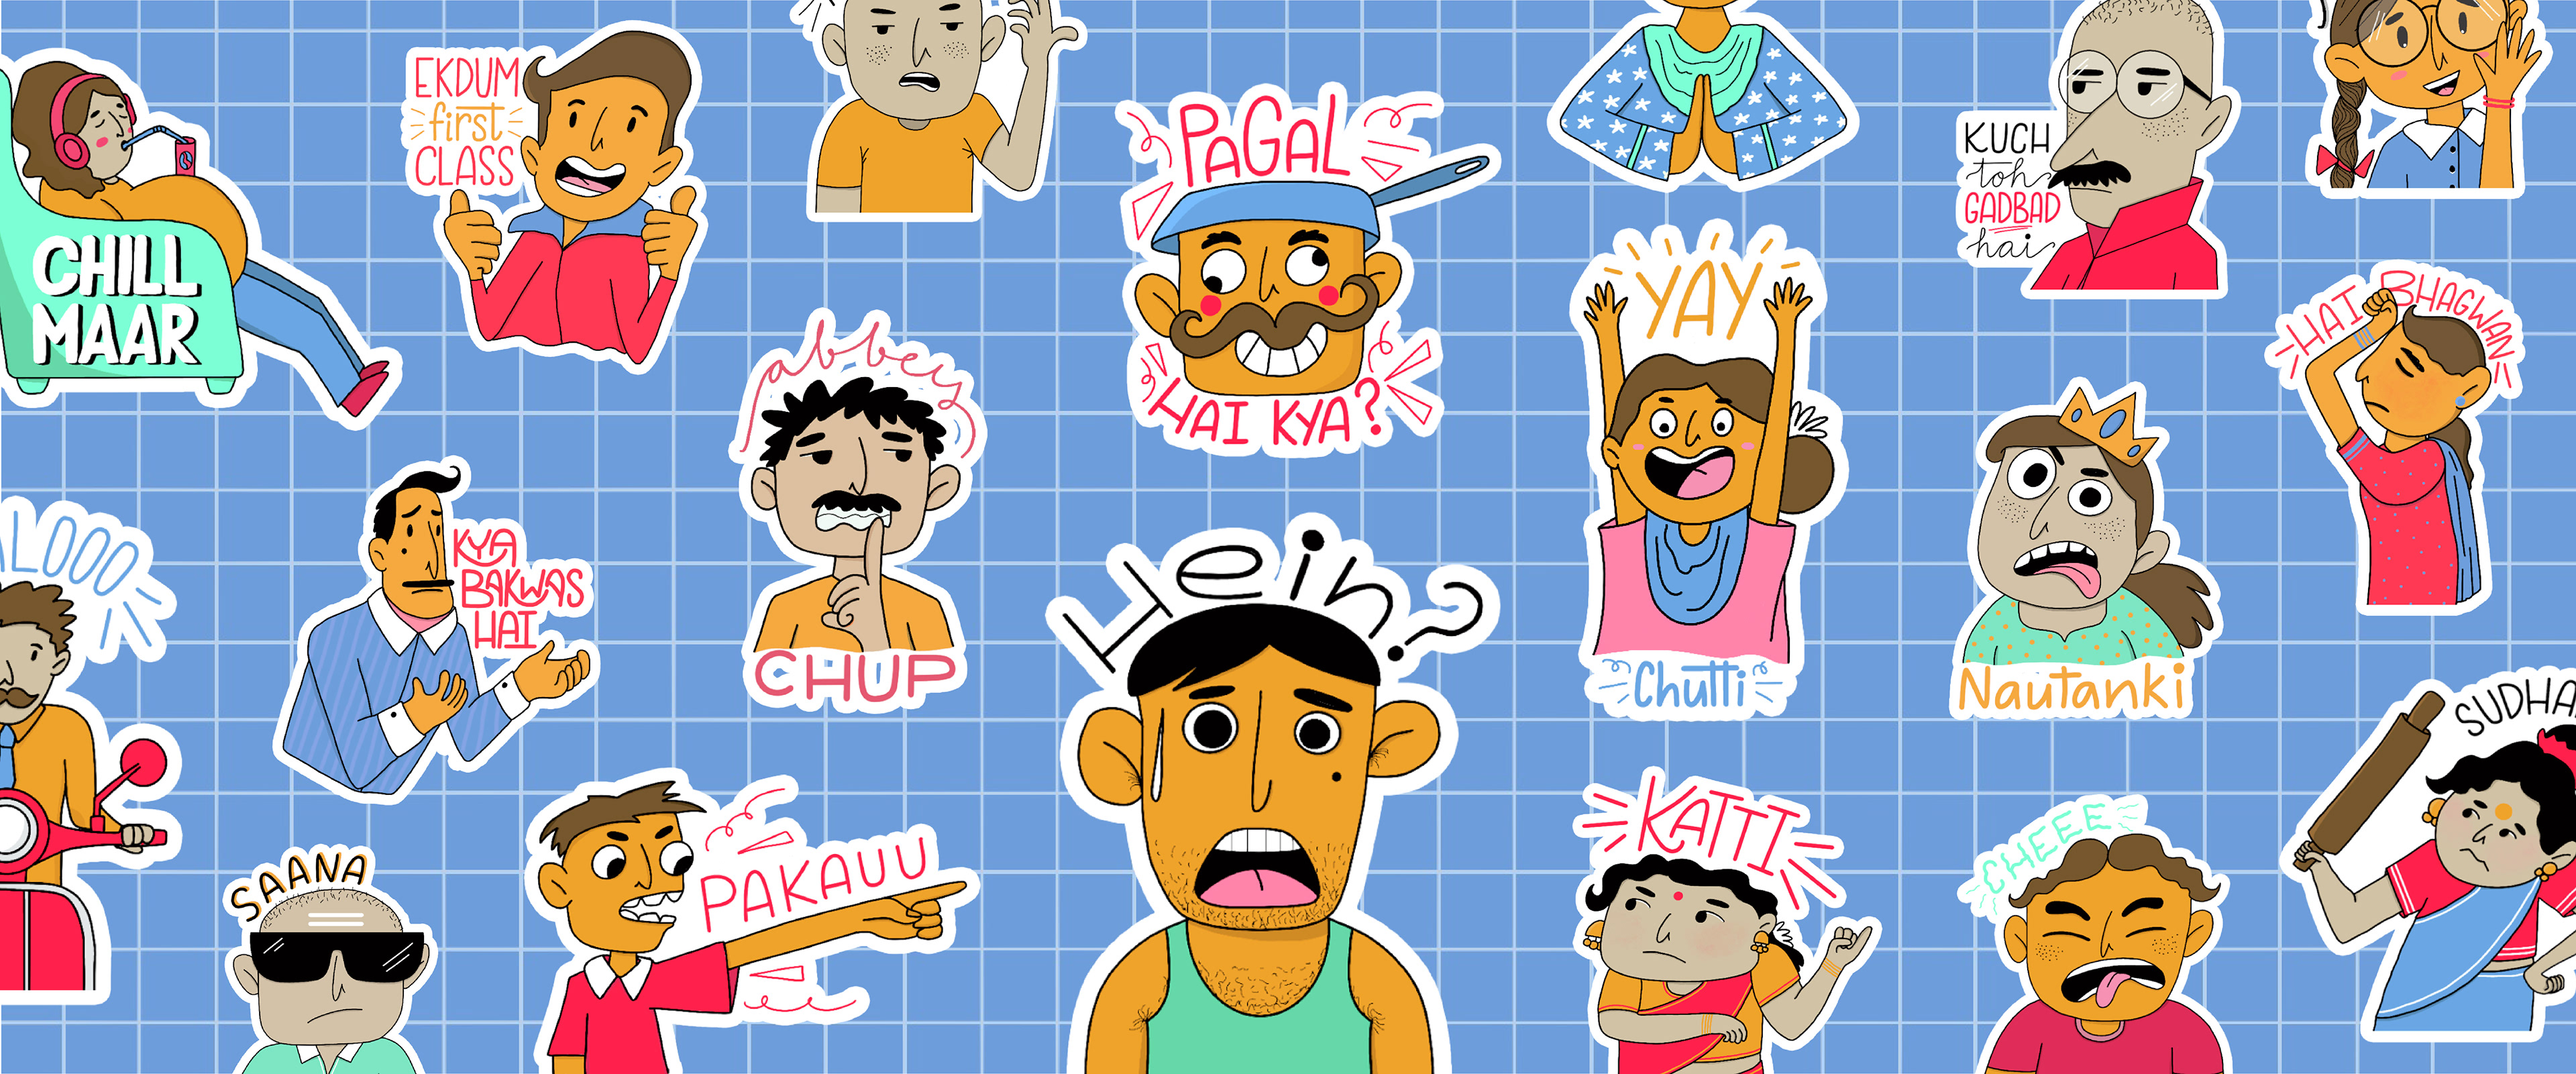 Hindi anime pack is The Best New WhatsApp Sticker Pack